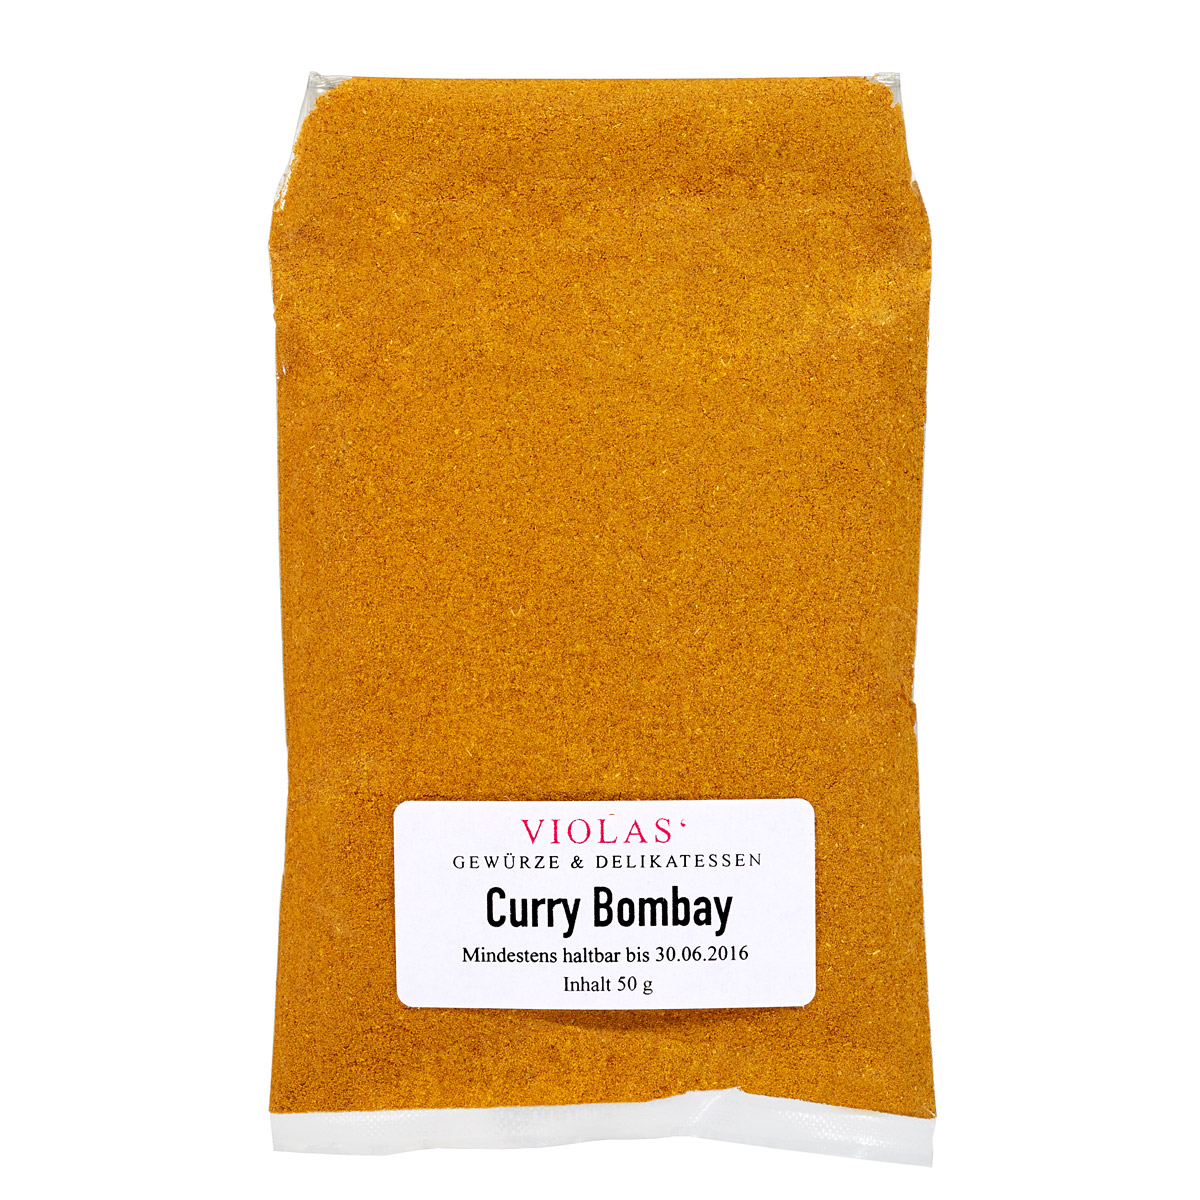 Curry Bombay